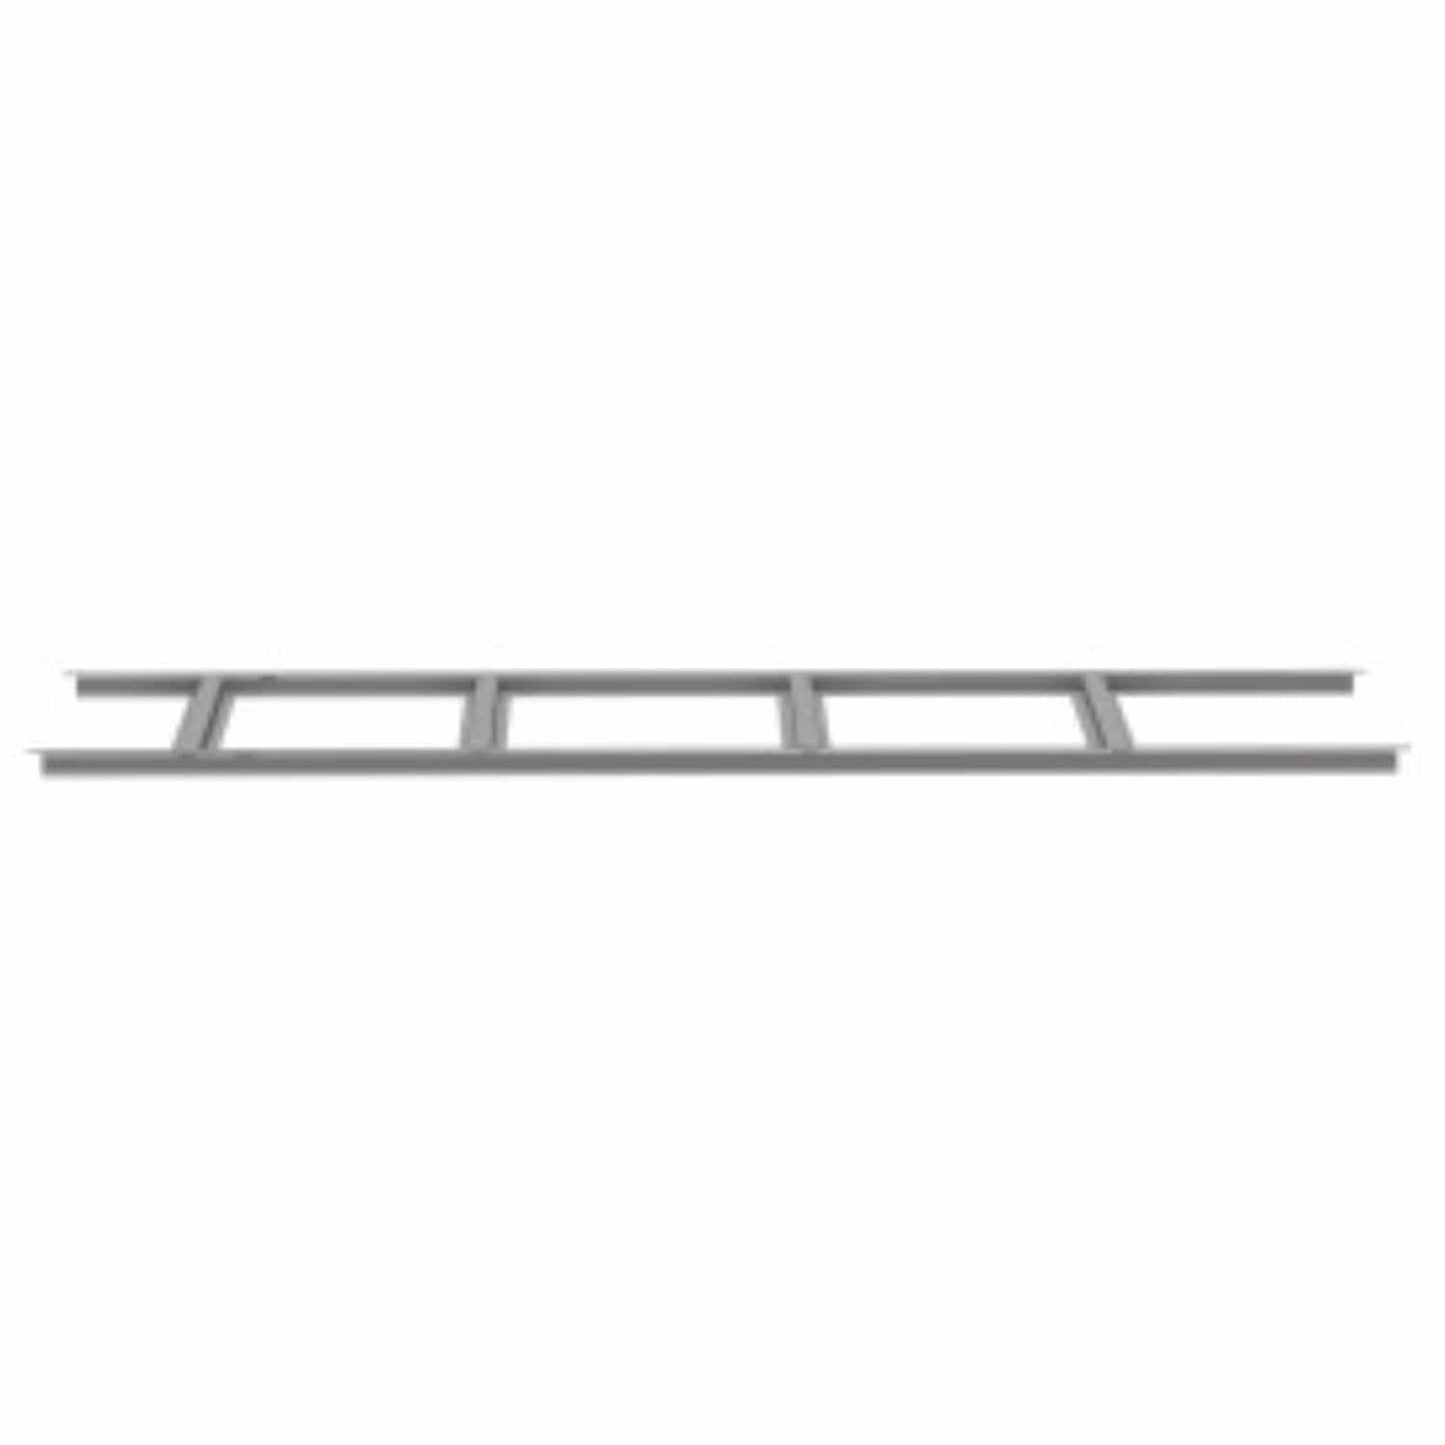 Arrow Shed Accessories Arrow | Floor Frame Kit for Arrow Classic Sheds 5x4, 6x4, 6x5 ft. and Arrow Select Sheds 6x4 and 6x5 ft. FKCS01